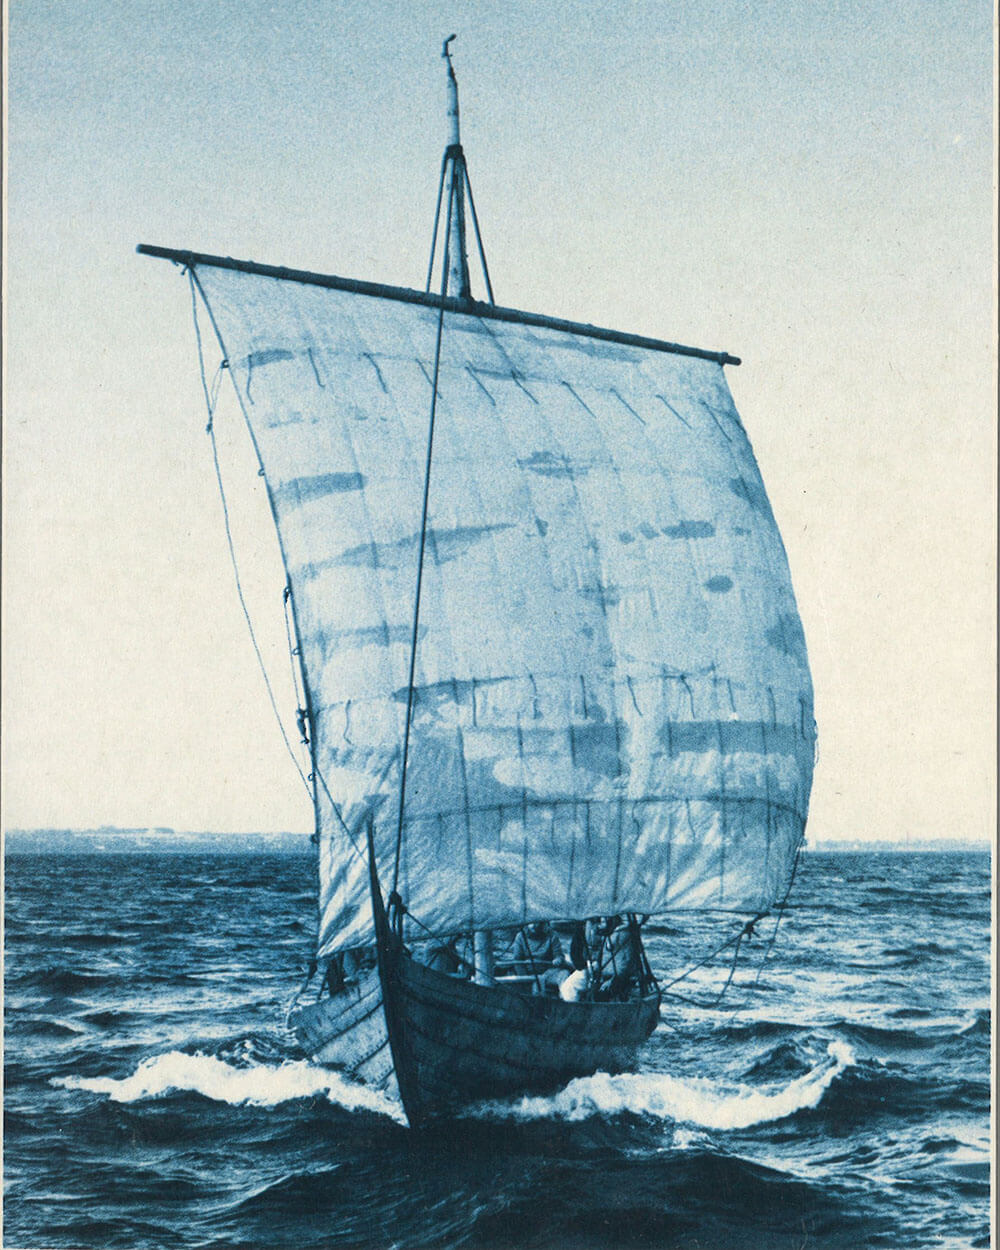 Trireme in the sea